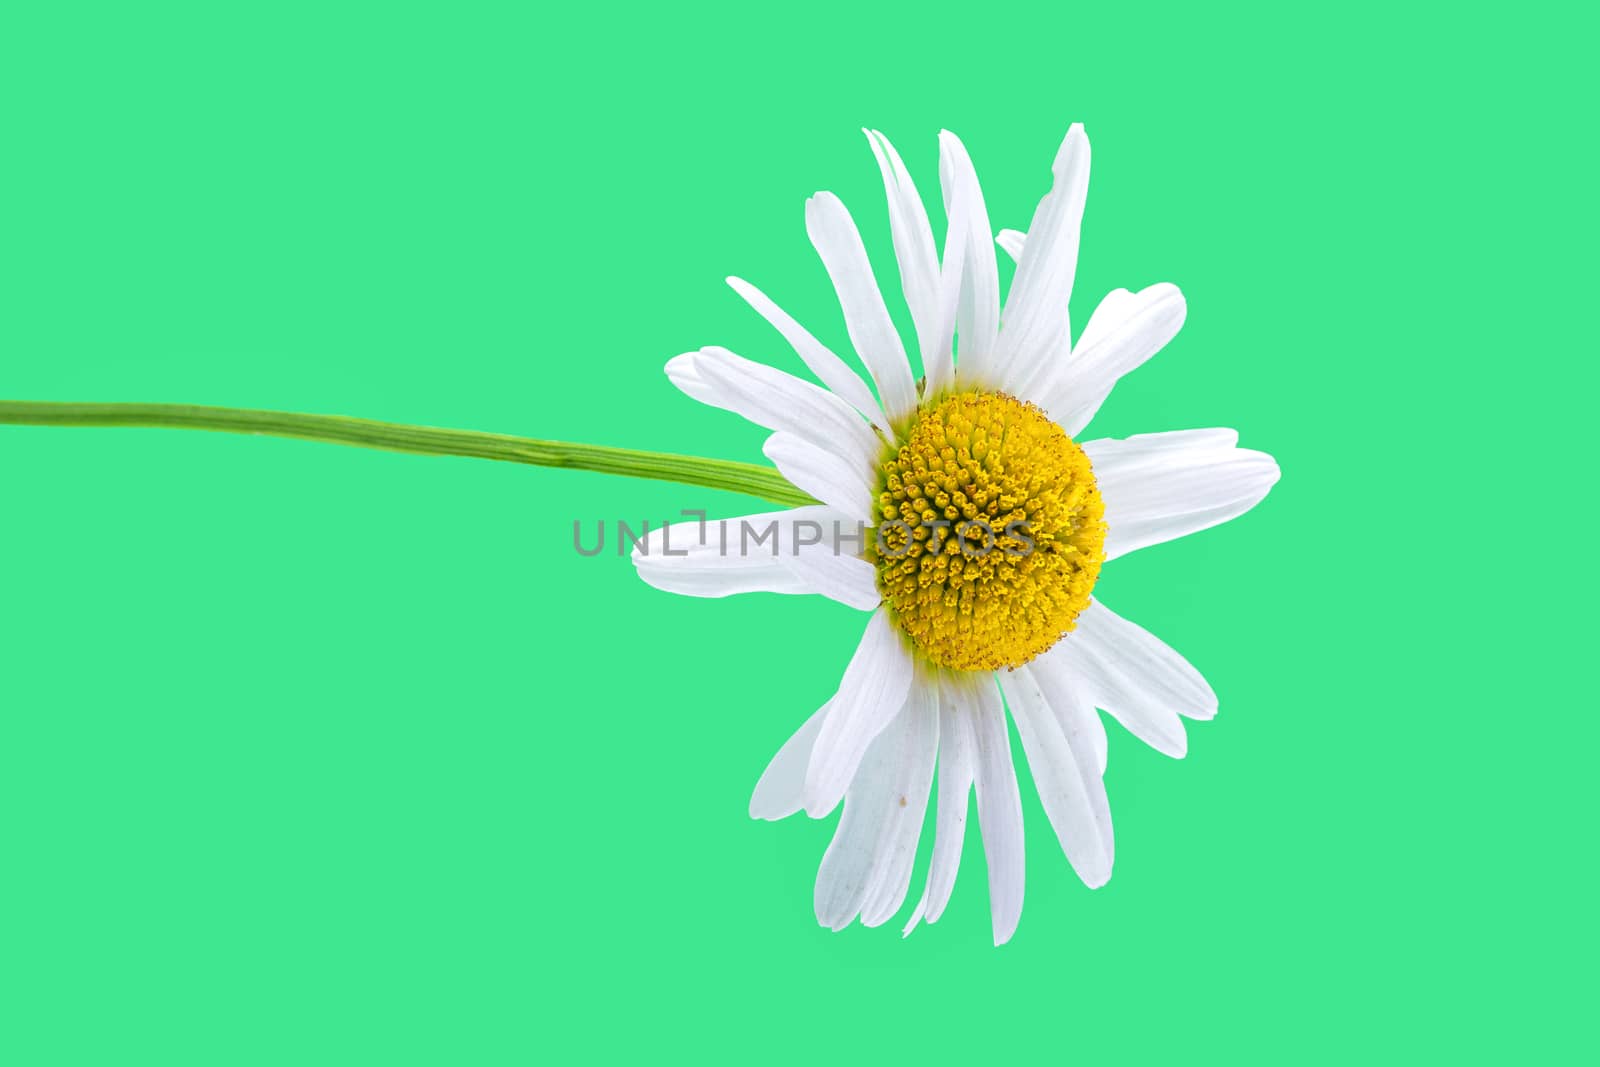 Daisy flower isolated on a green background